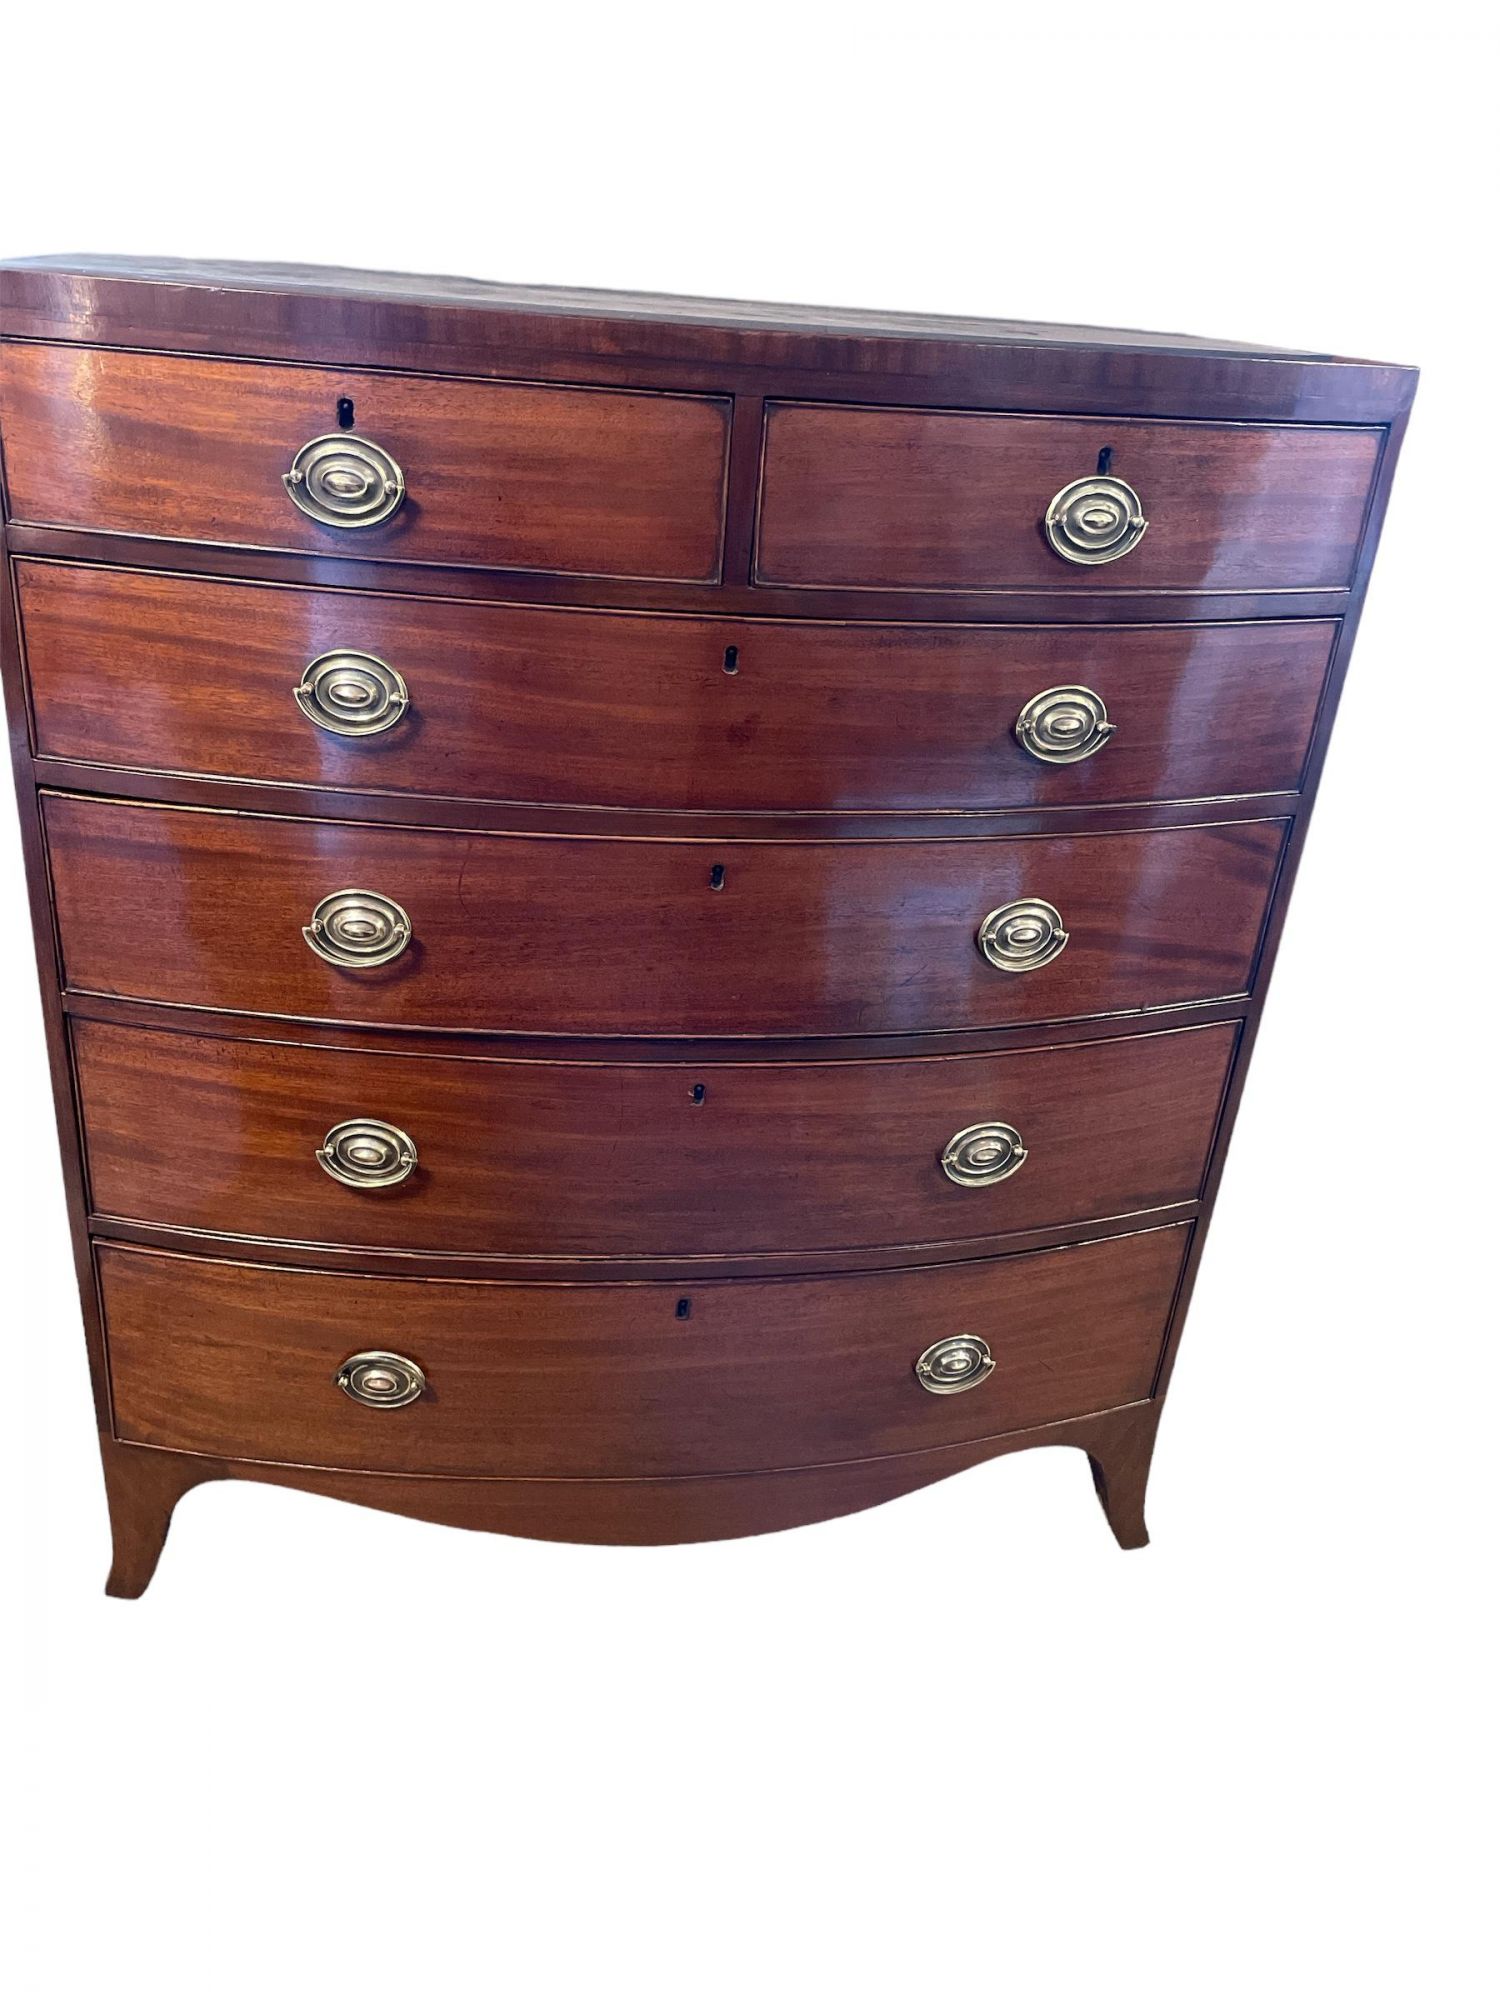 A Fine Flame Victorian Mahogany Bow Front Chest Of Drawers Antique